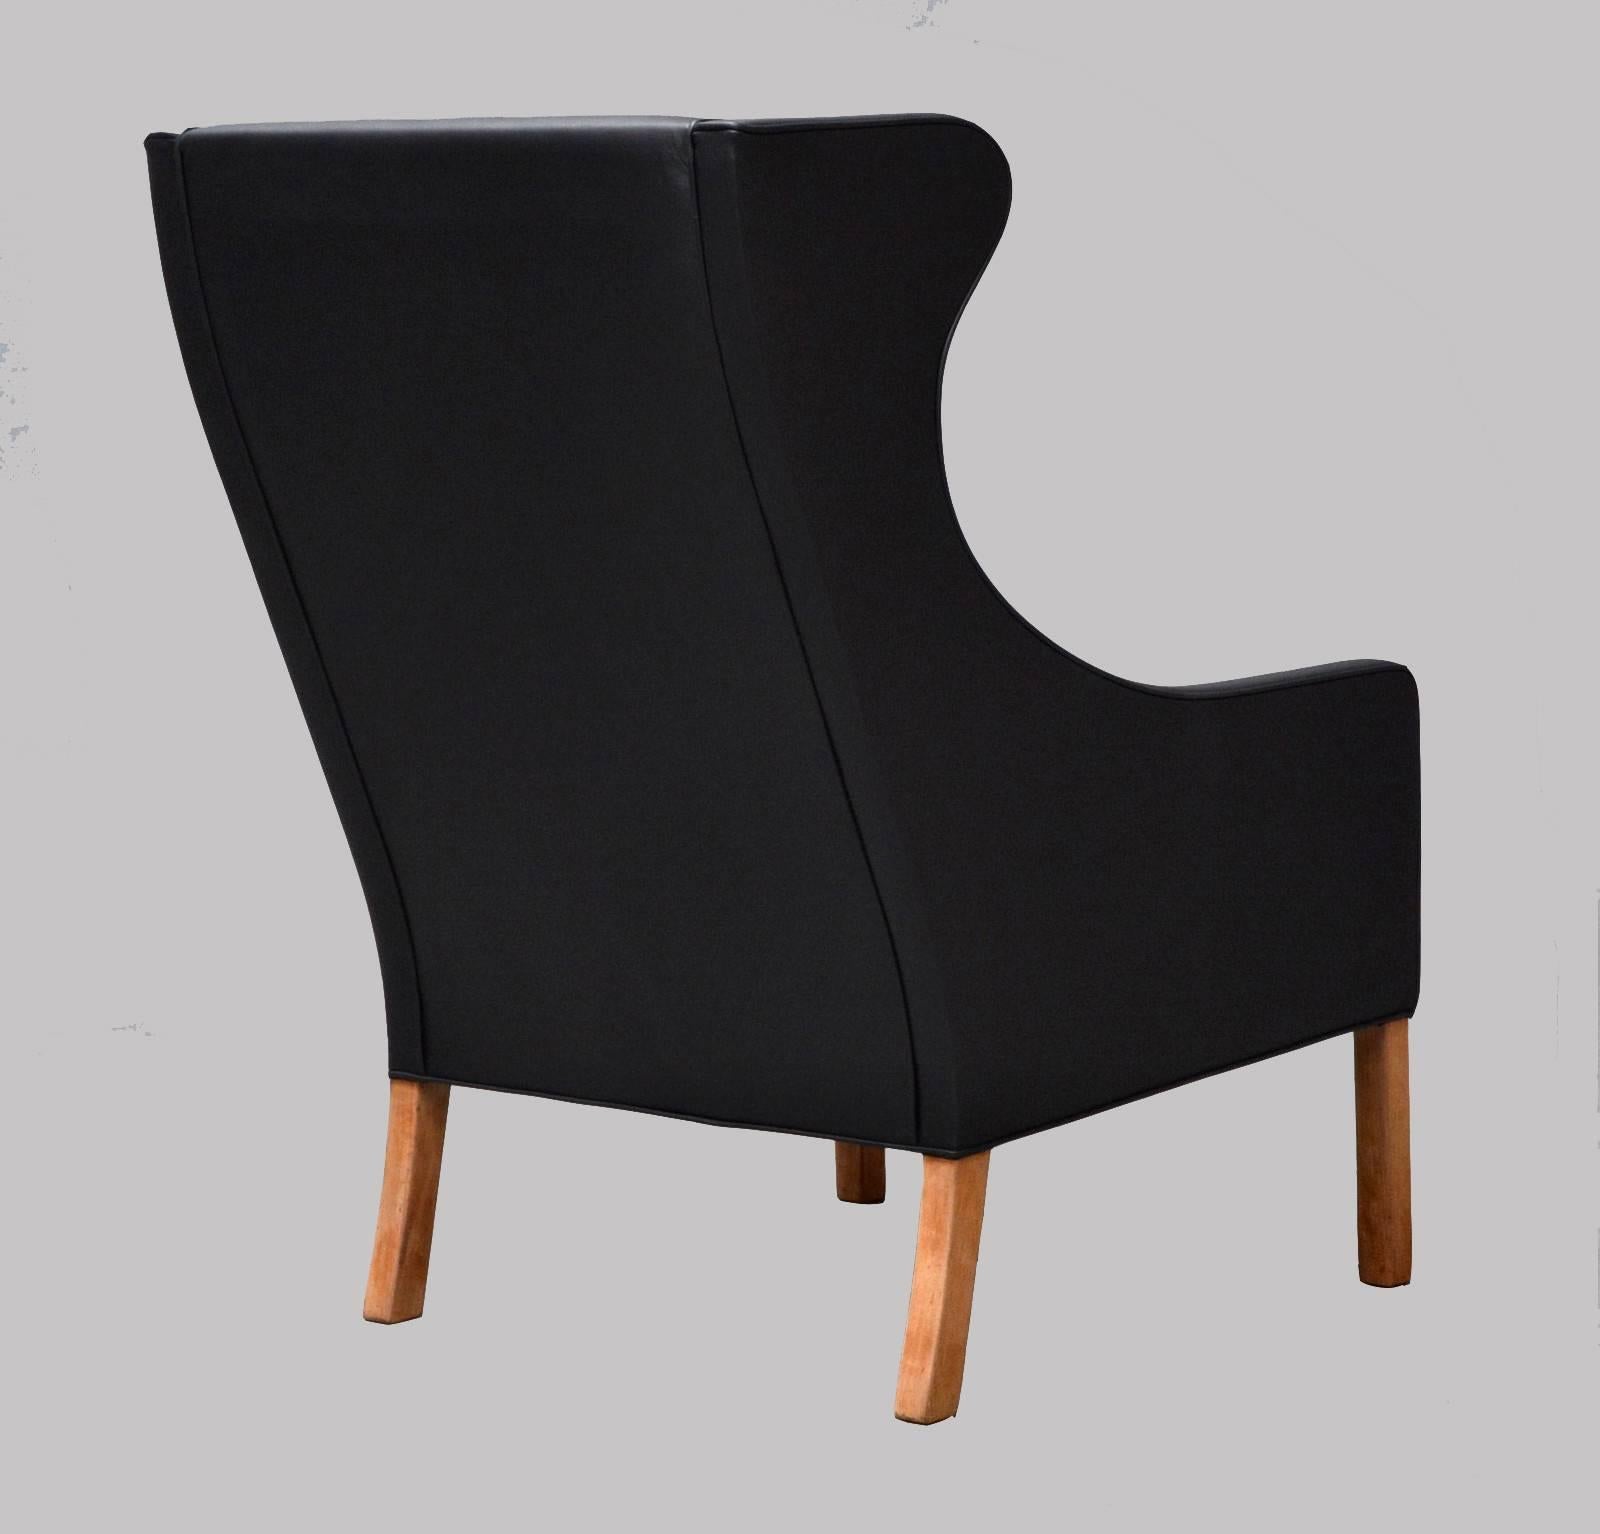 Danish Borge Mogensen Leathered Model 2204 Wingback Chair by Fredericia Stolefabrik